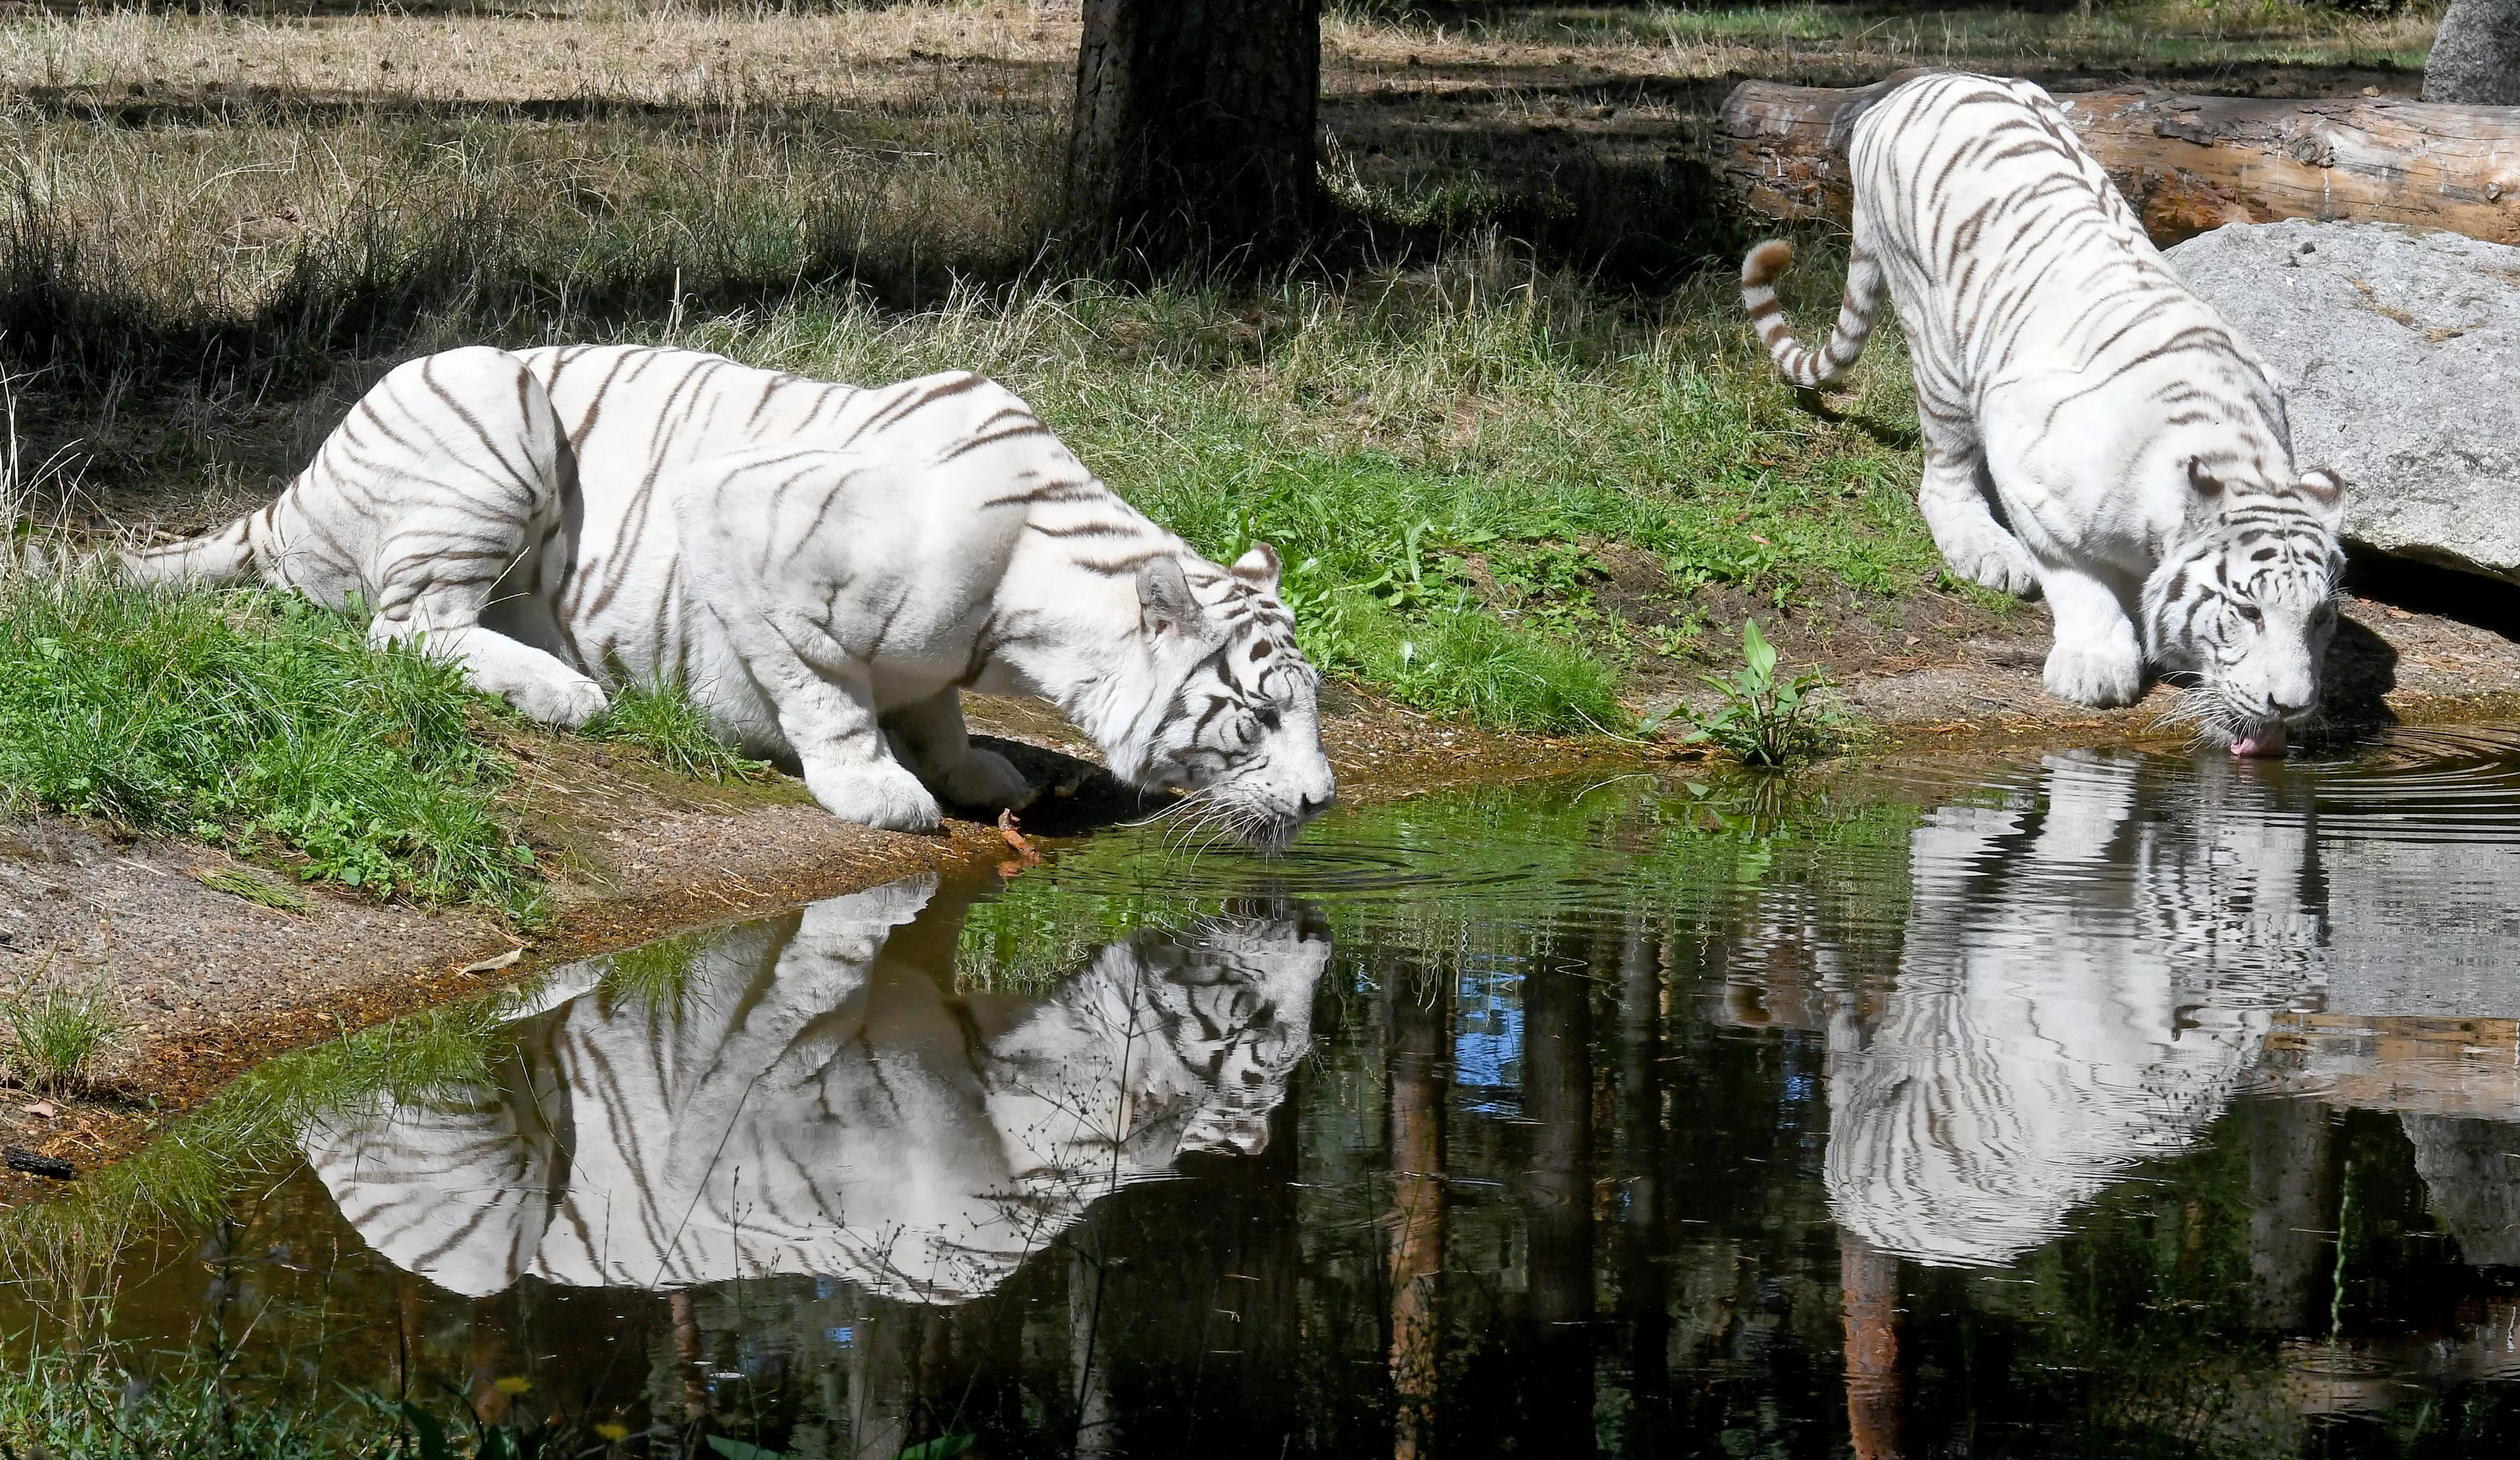 White tigers at a zoo in Germany.